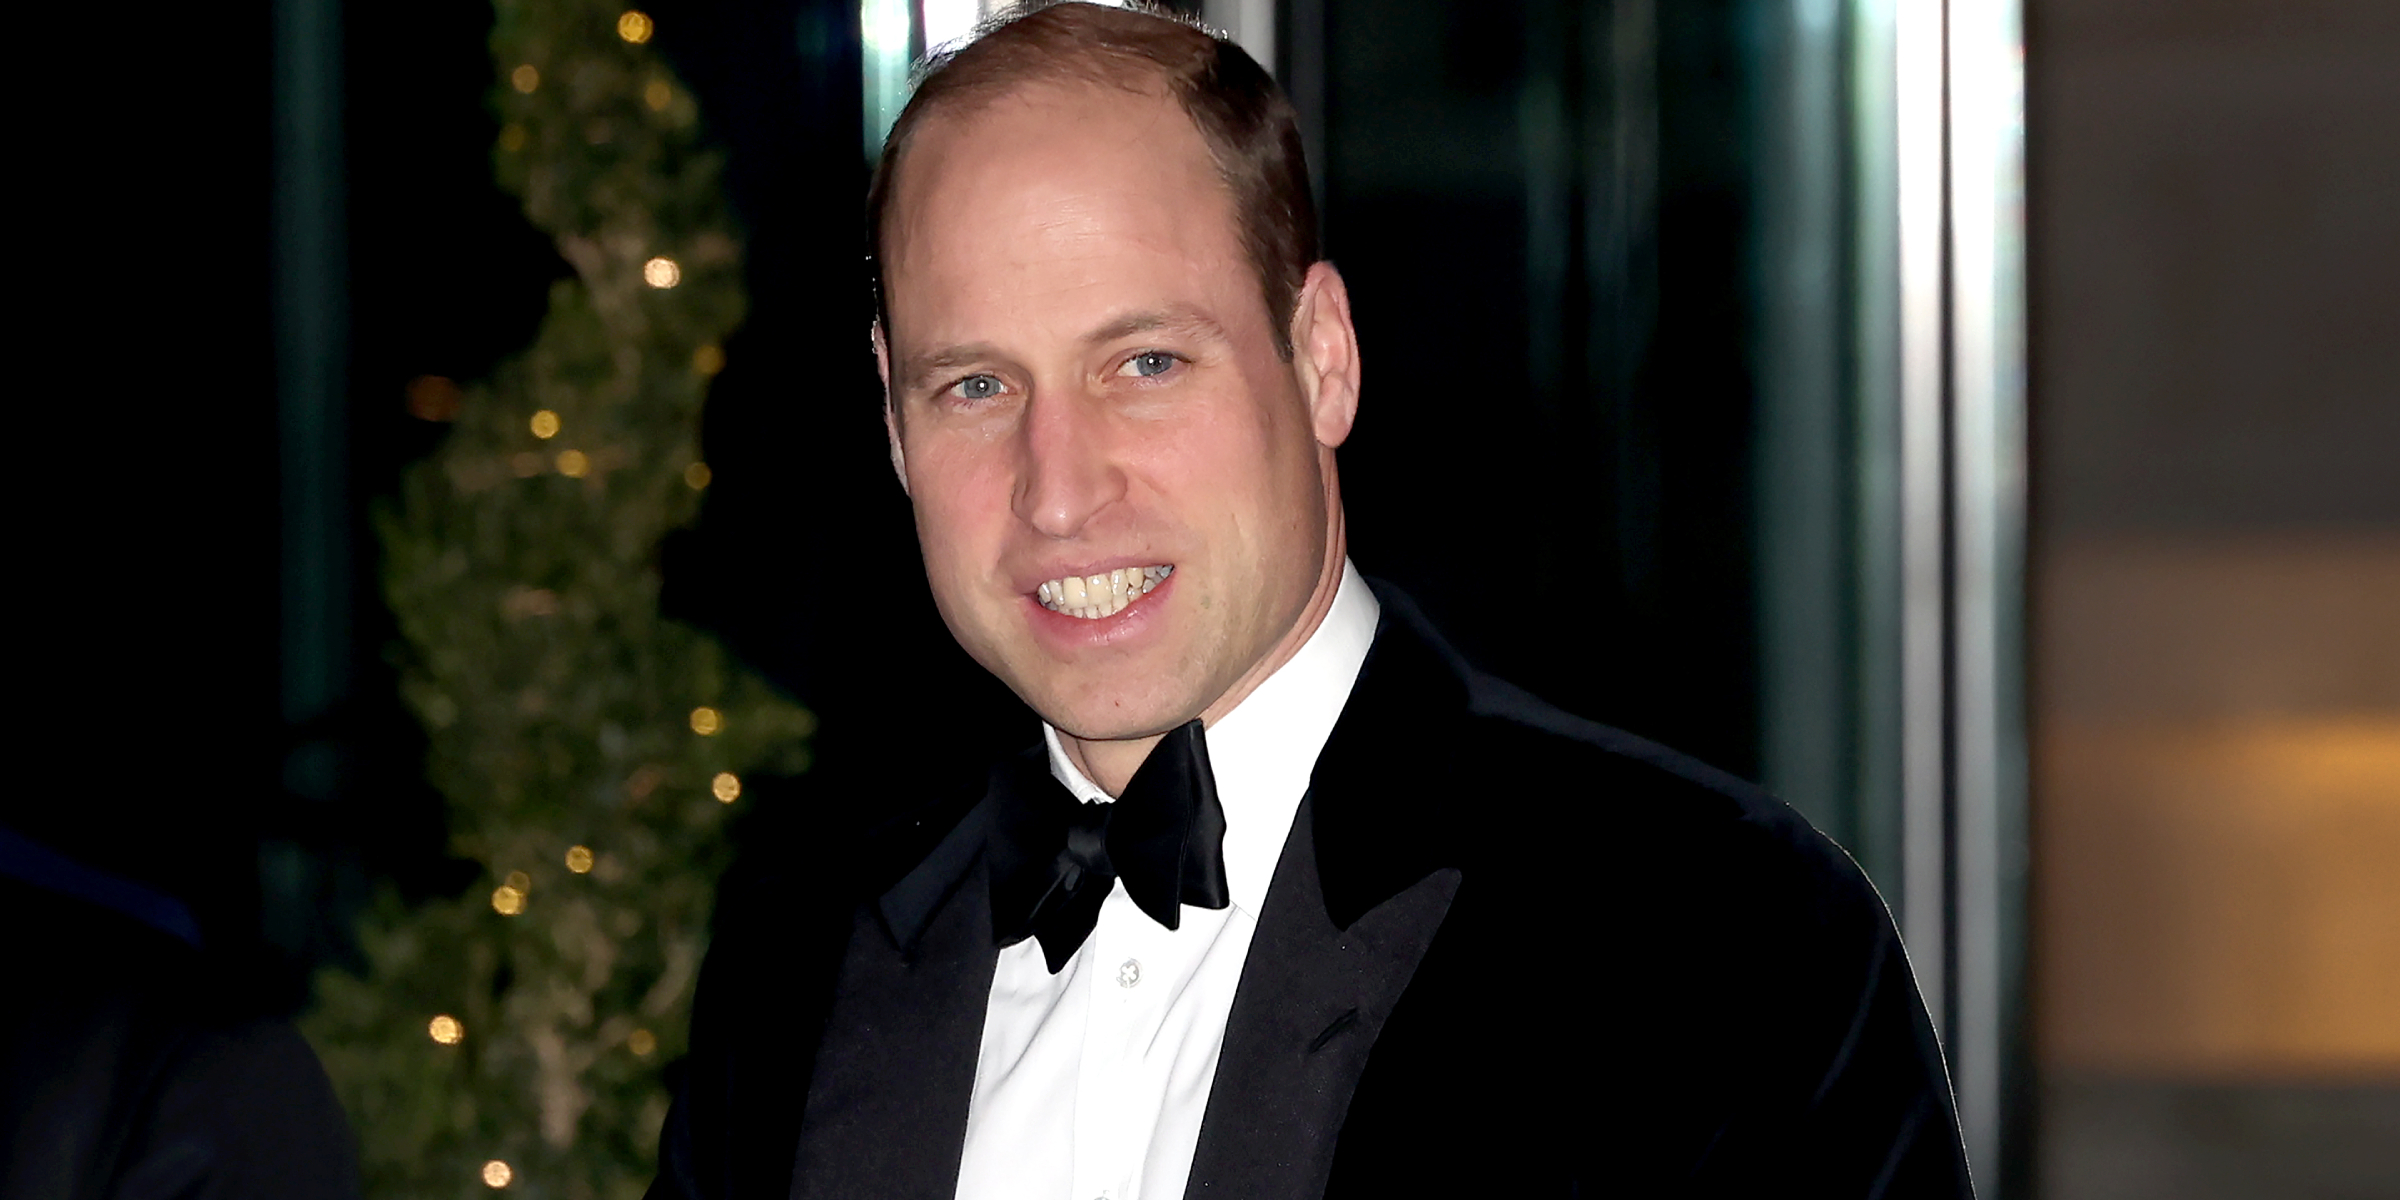 Prince William | Source: Getty Images